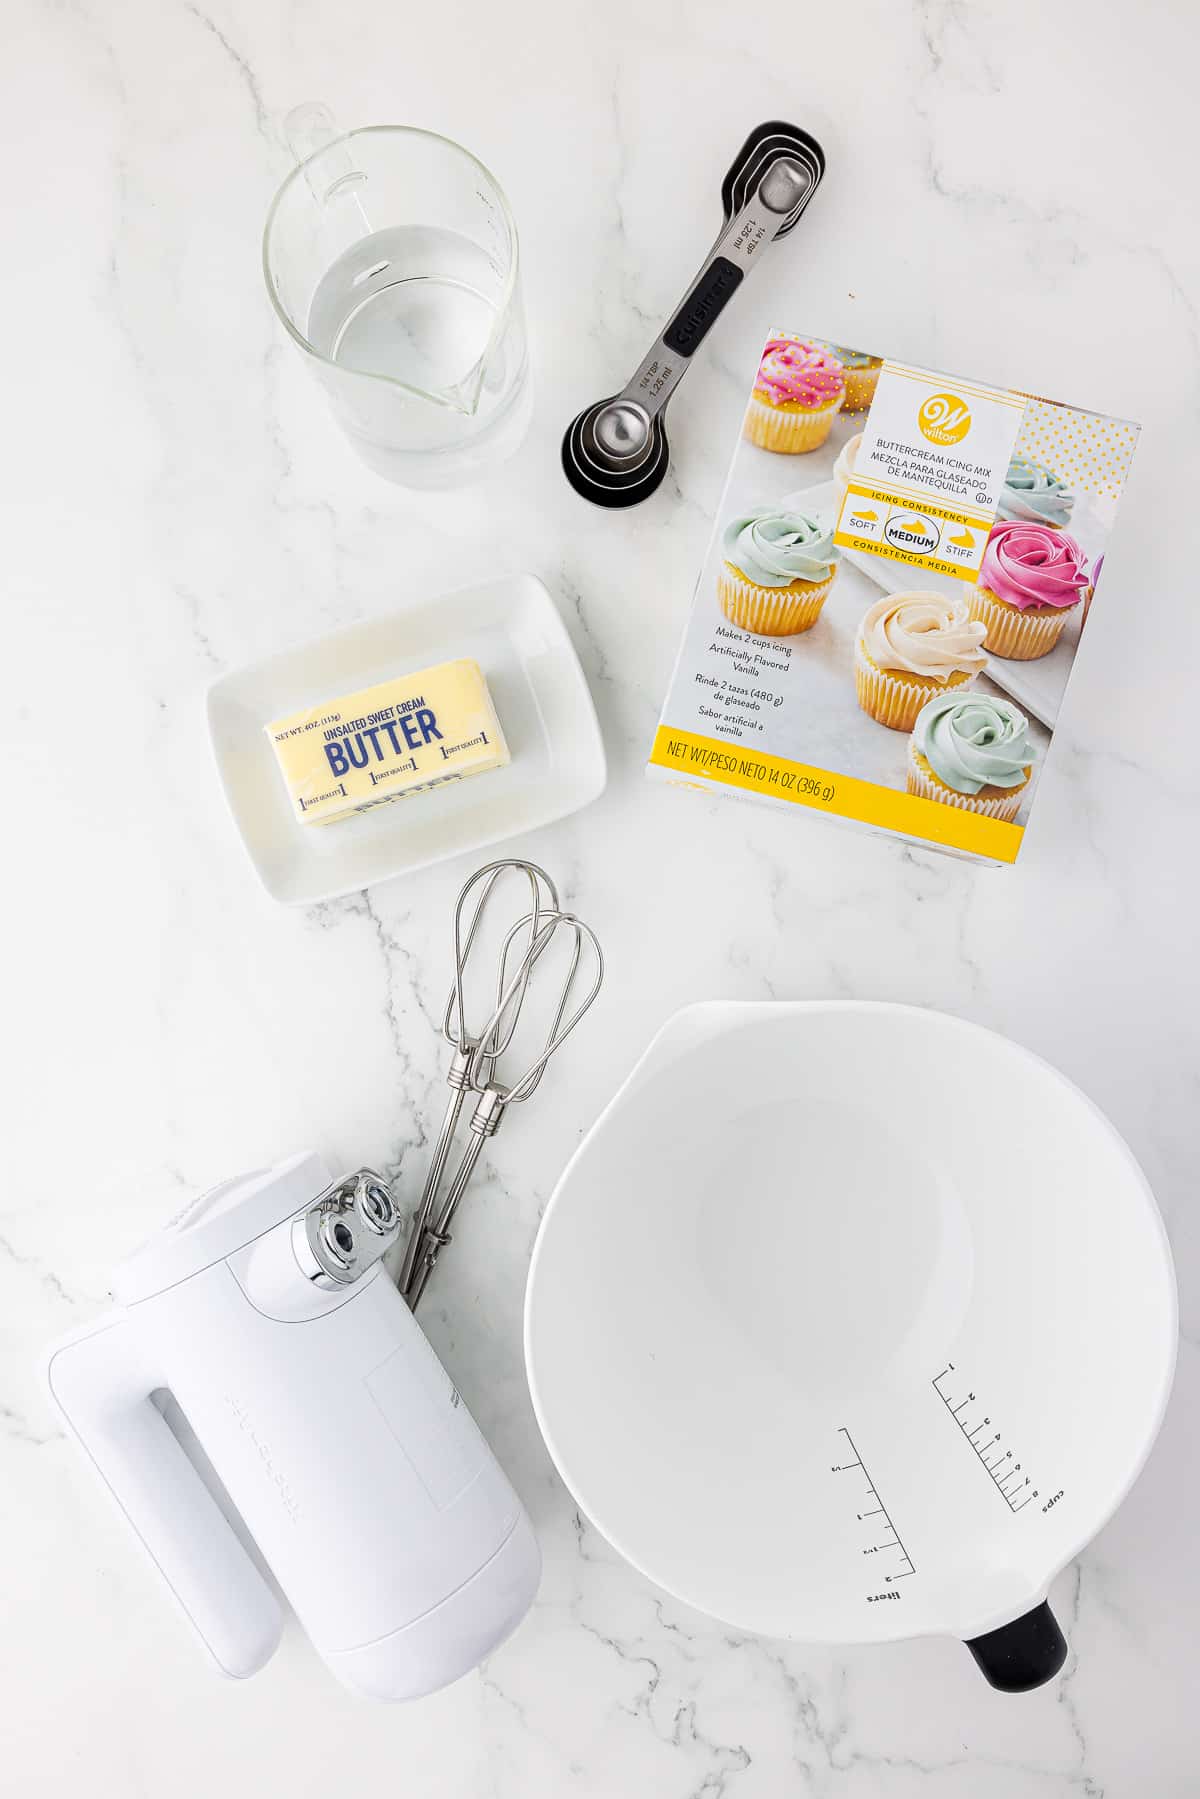 Wilton buttercream frosting kit and a mixer, mixing bowl and a stick of butter on the counter